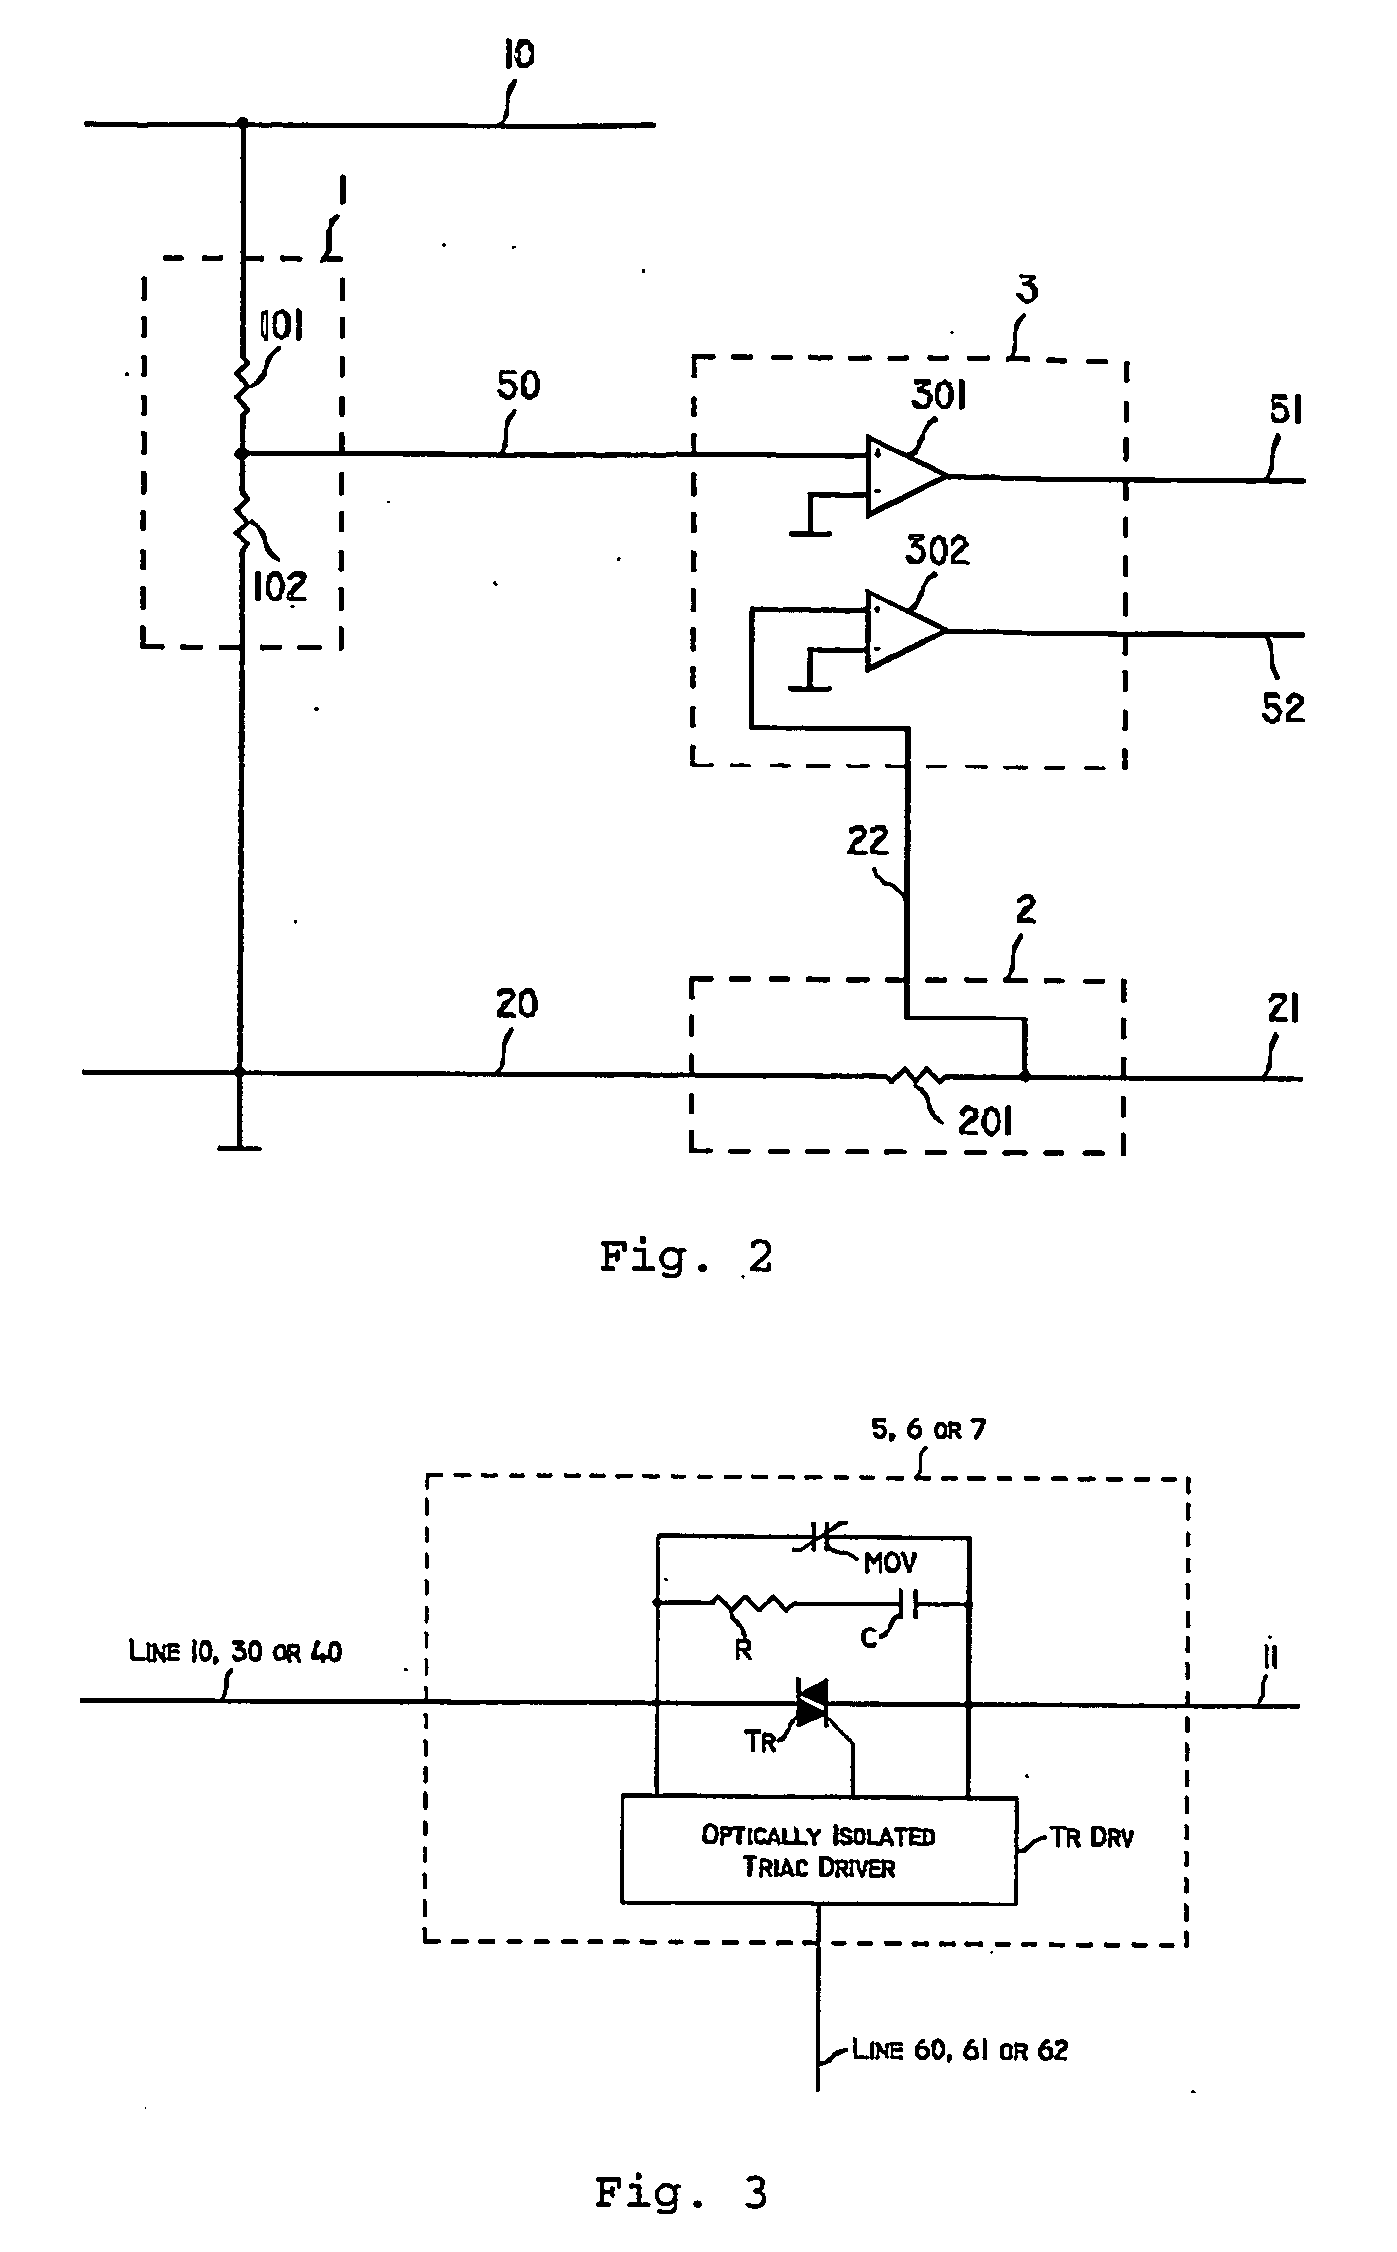 Step sinusoidal voltage controlling method for hid, flourescent and incandescent light dimming applications